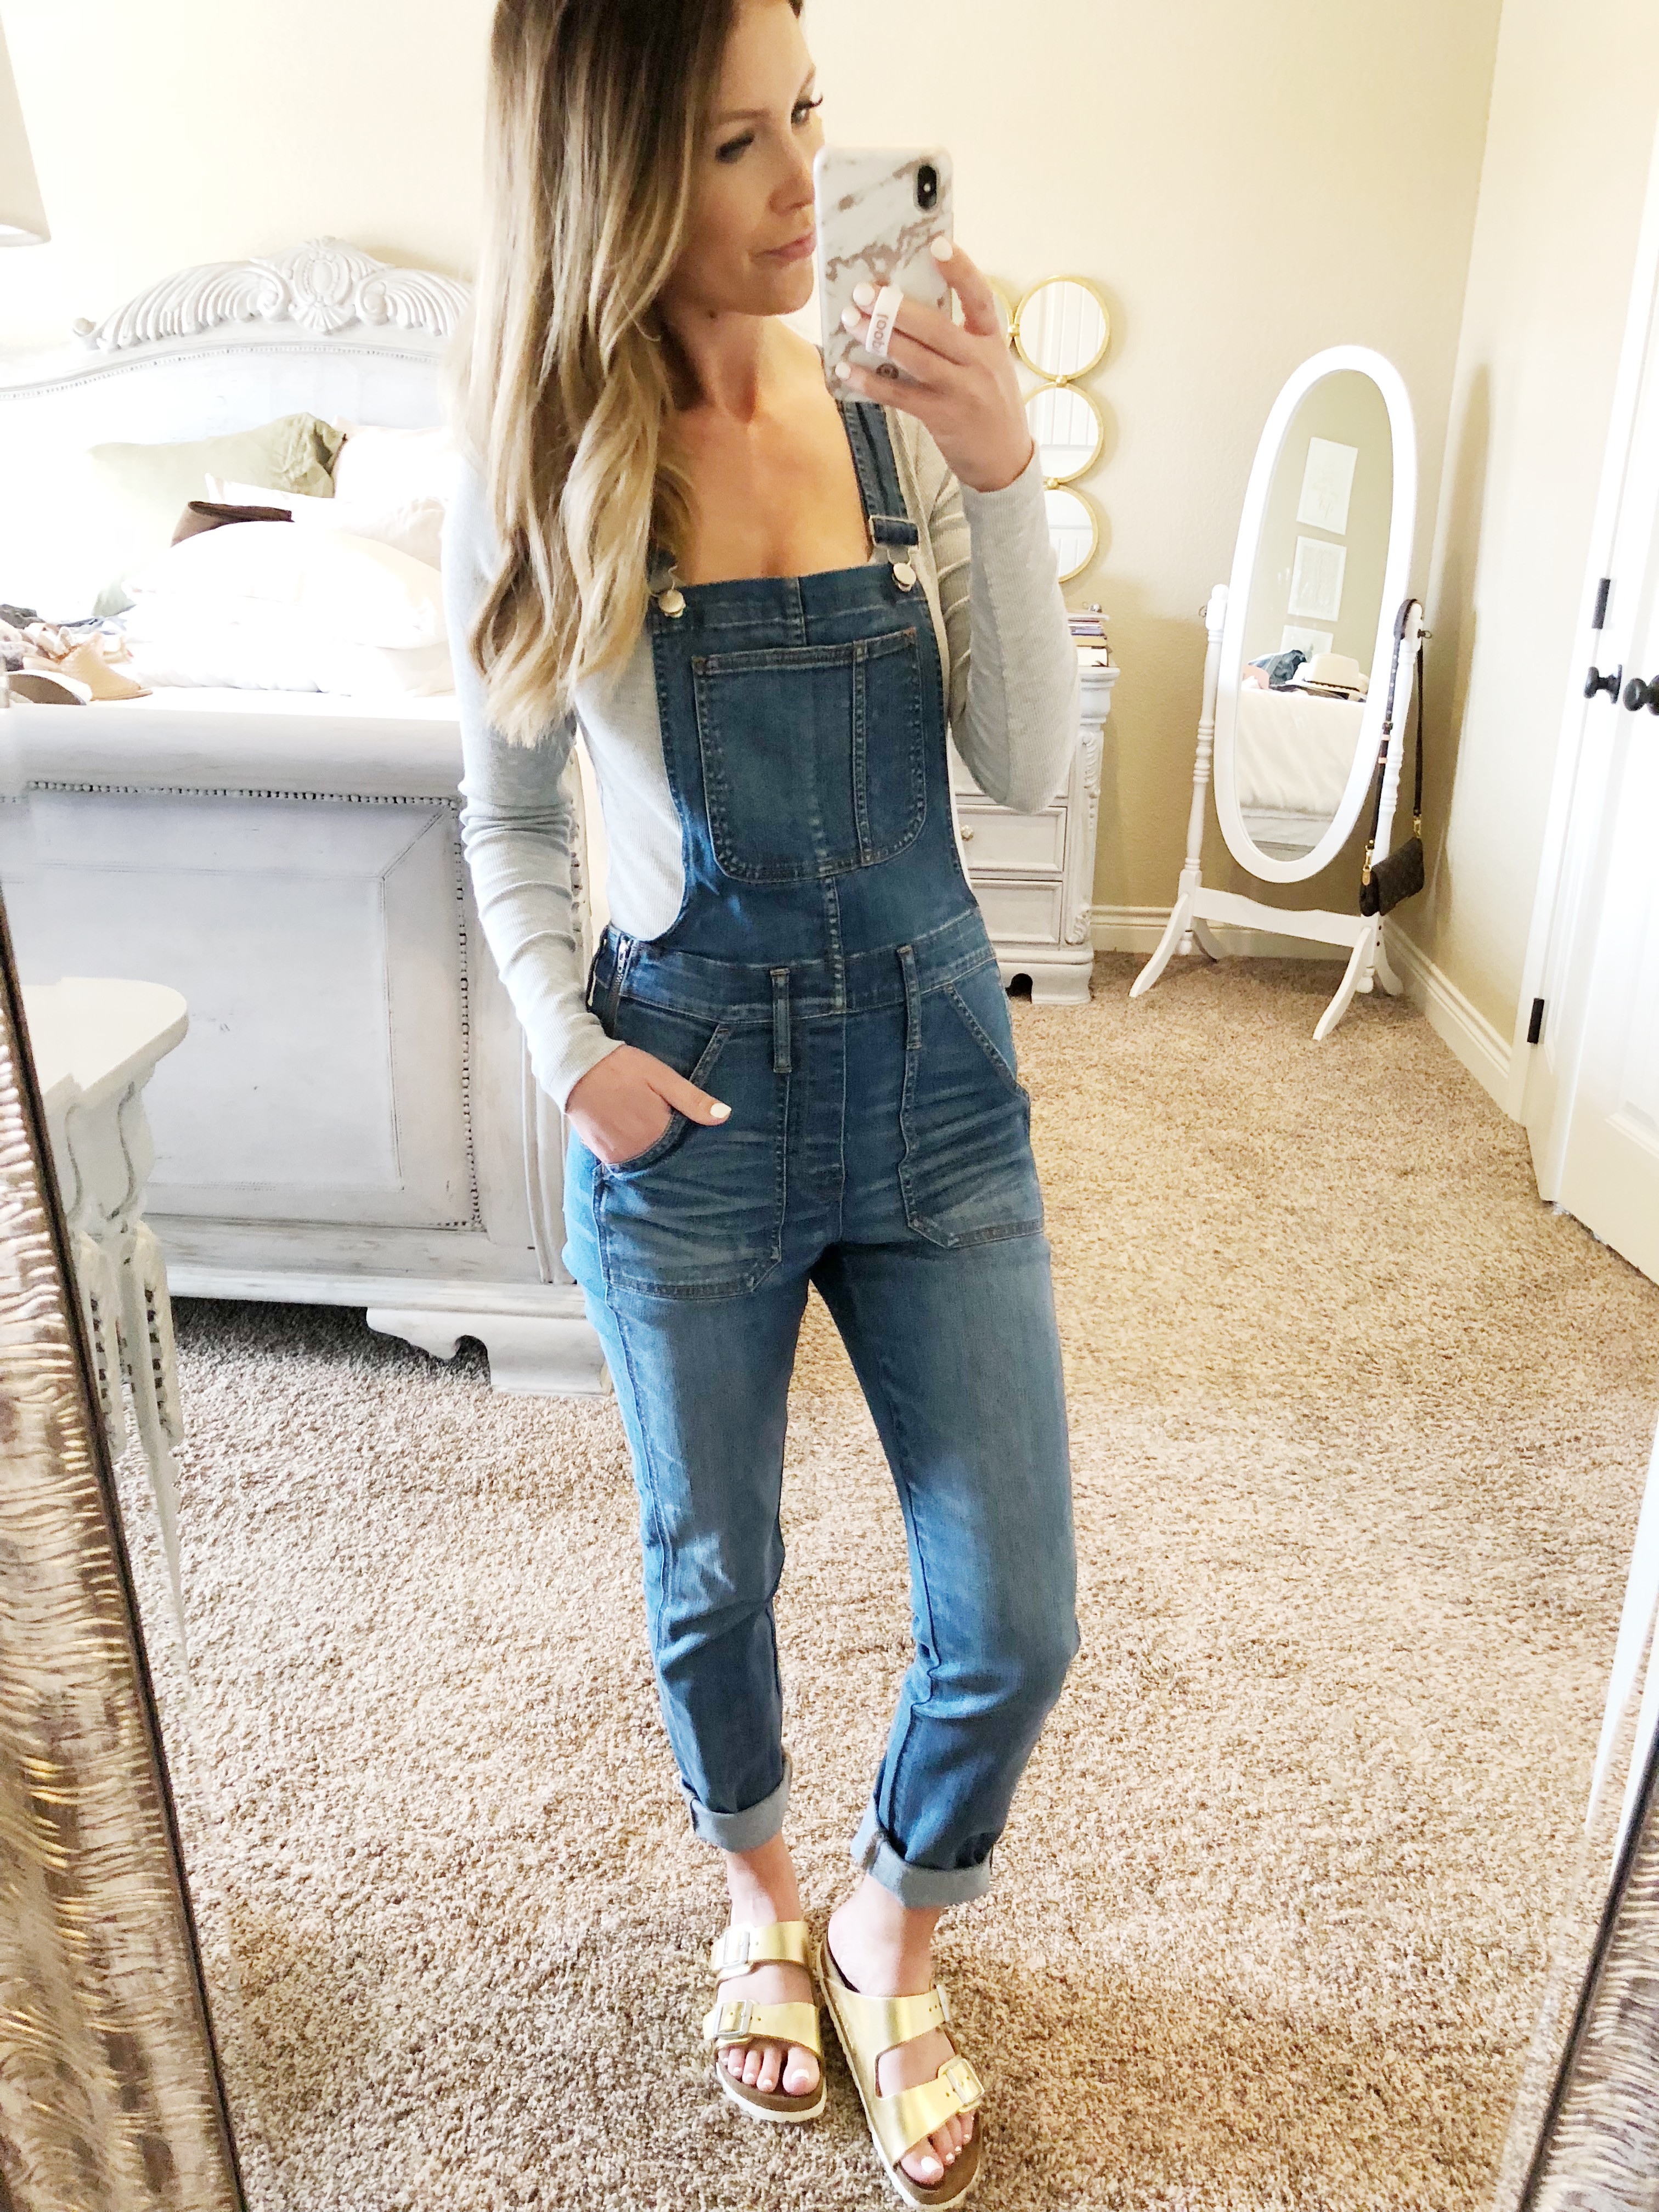 Spring Overalls Review - Ashlee Nichols